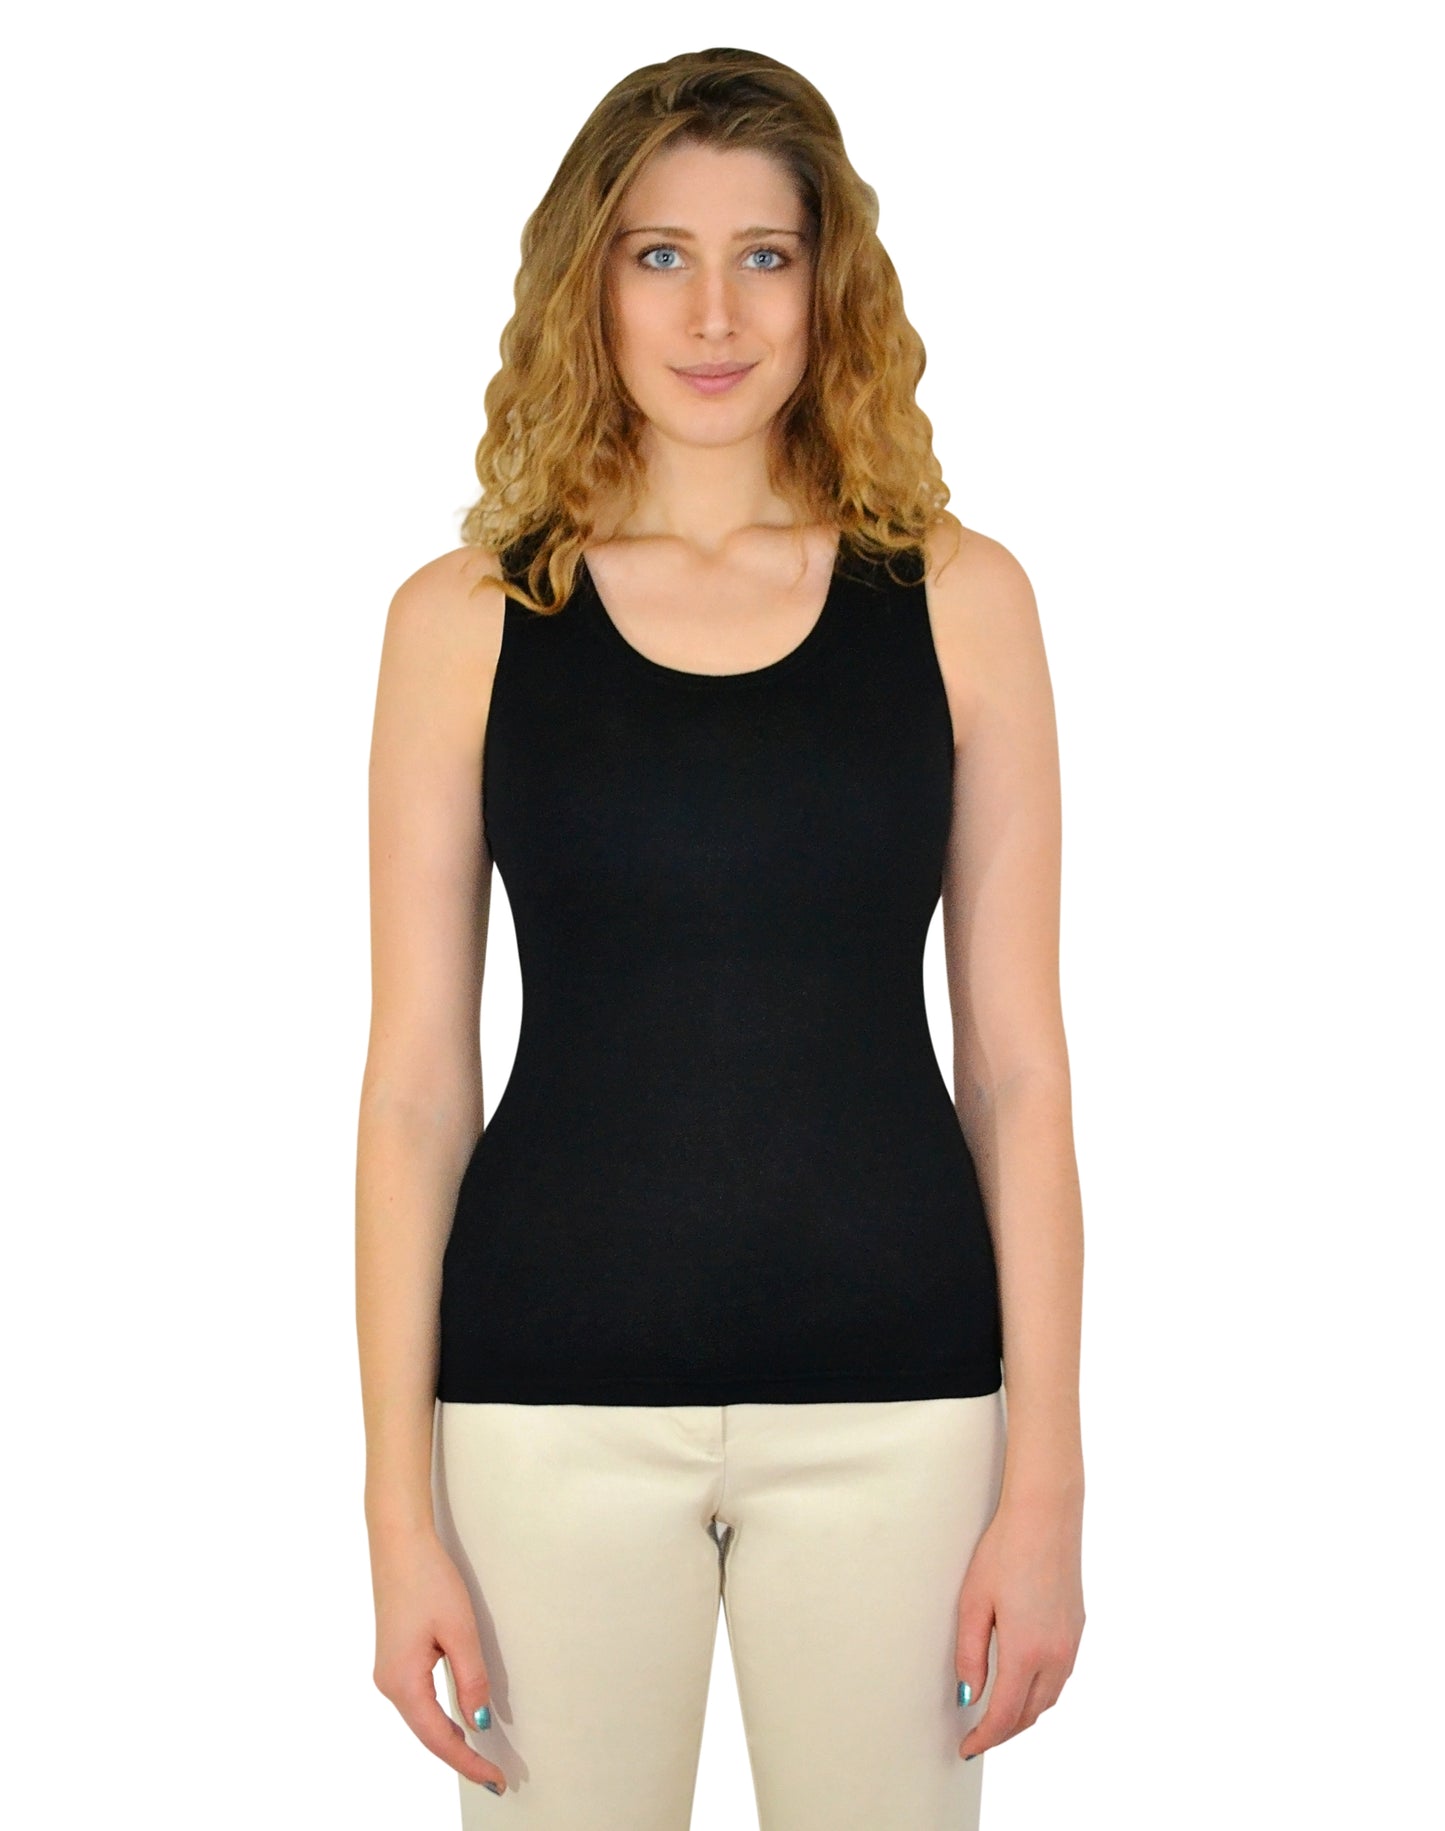 Full Coverage Tank Top (Two Colors Available)